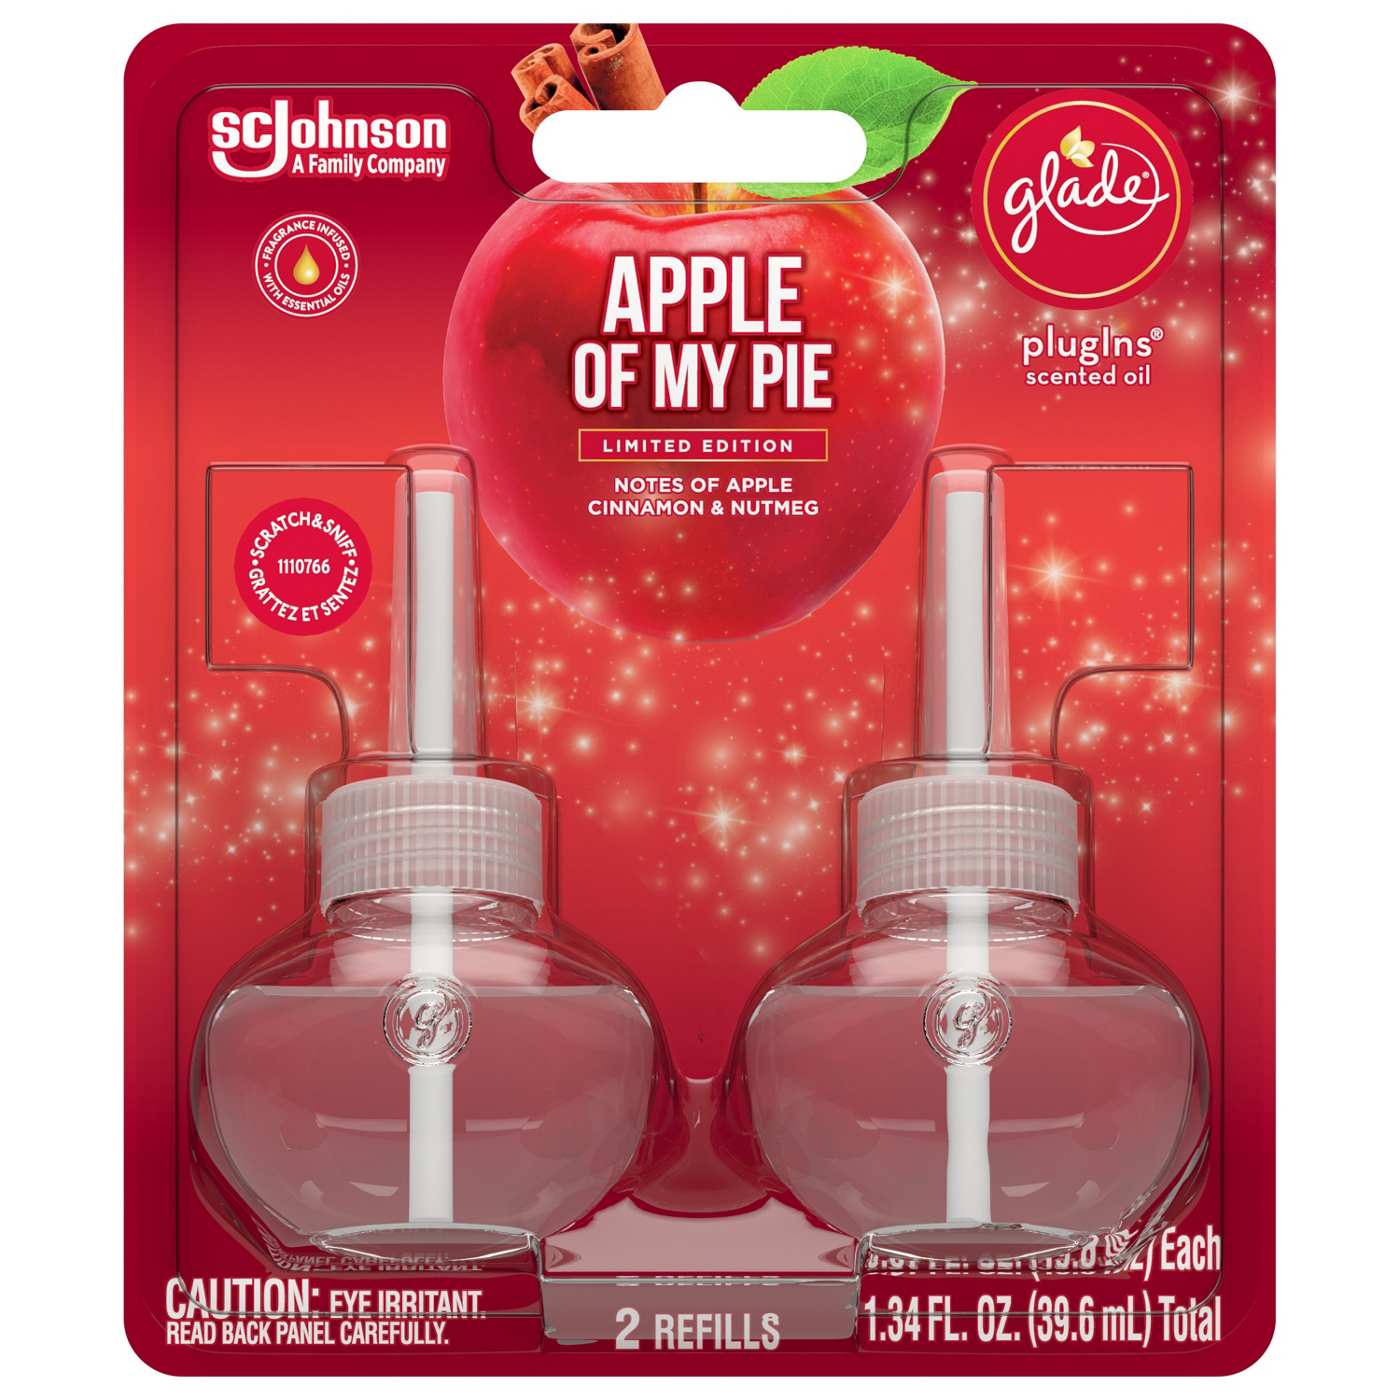 Glade PlugIns Scented Oil Air Freshener Refills - Apple of My Pie; image 1 of 3